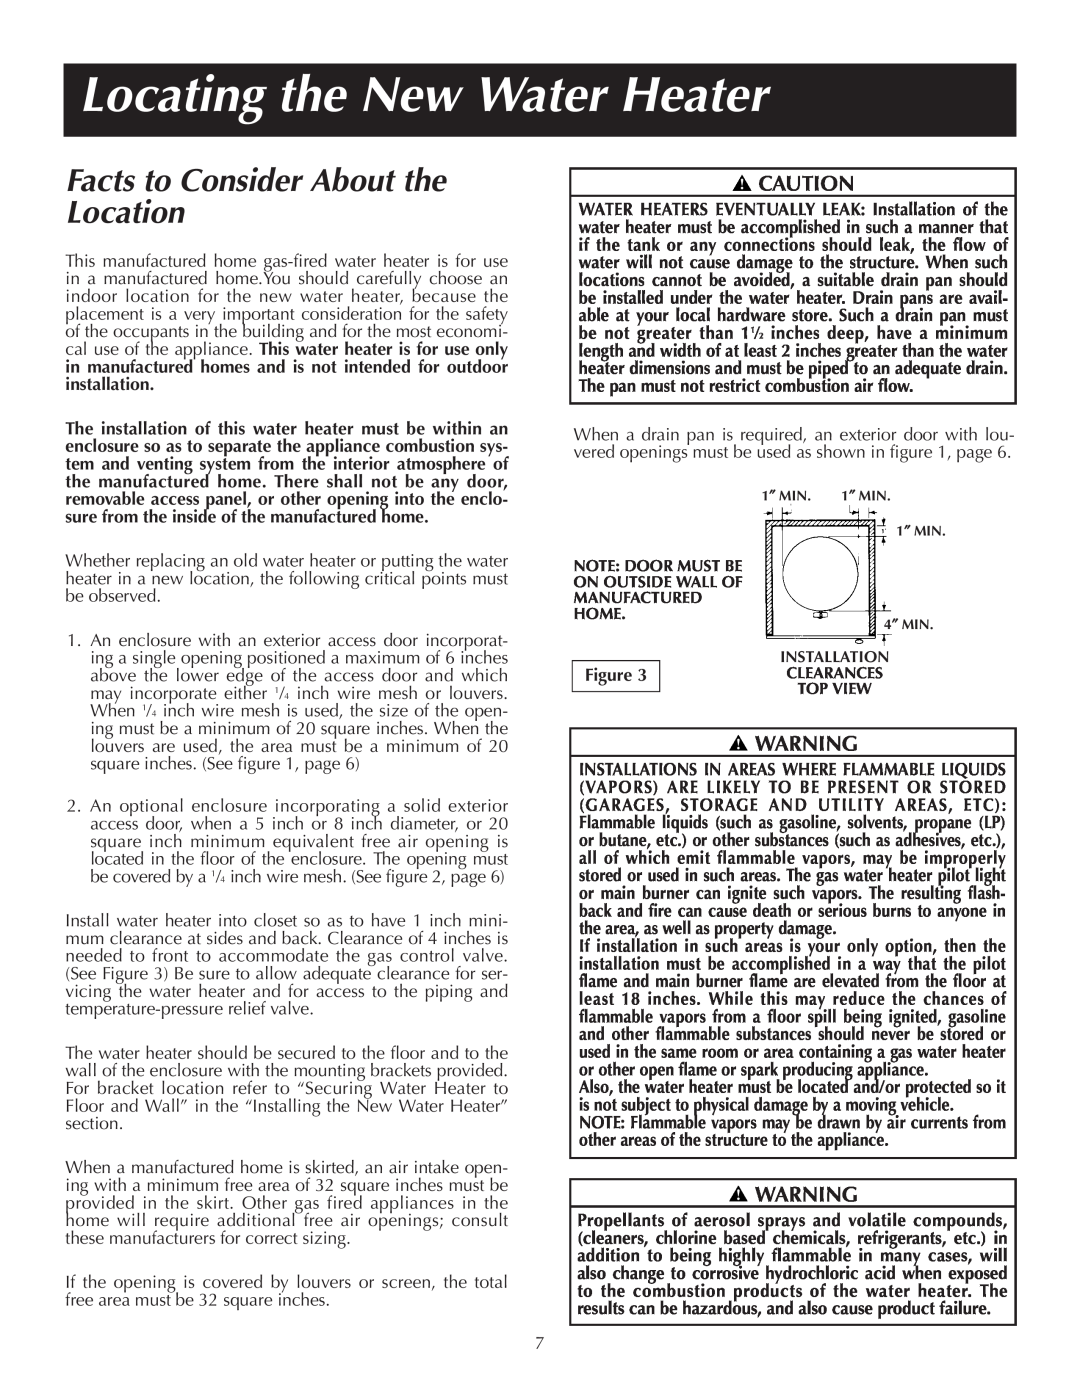 Reliance Water Heaters 184123-000 instruction manual Locating the New Water Heater, Facts to Consider About the Location 